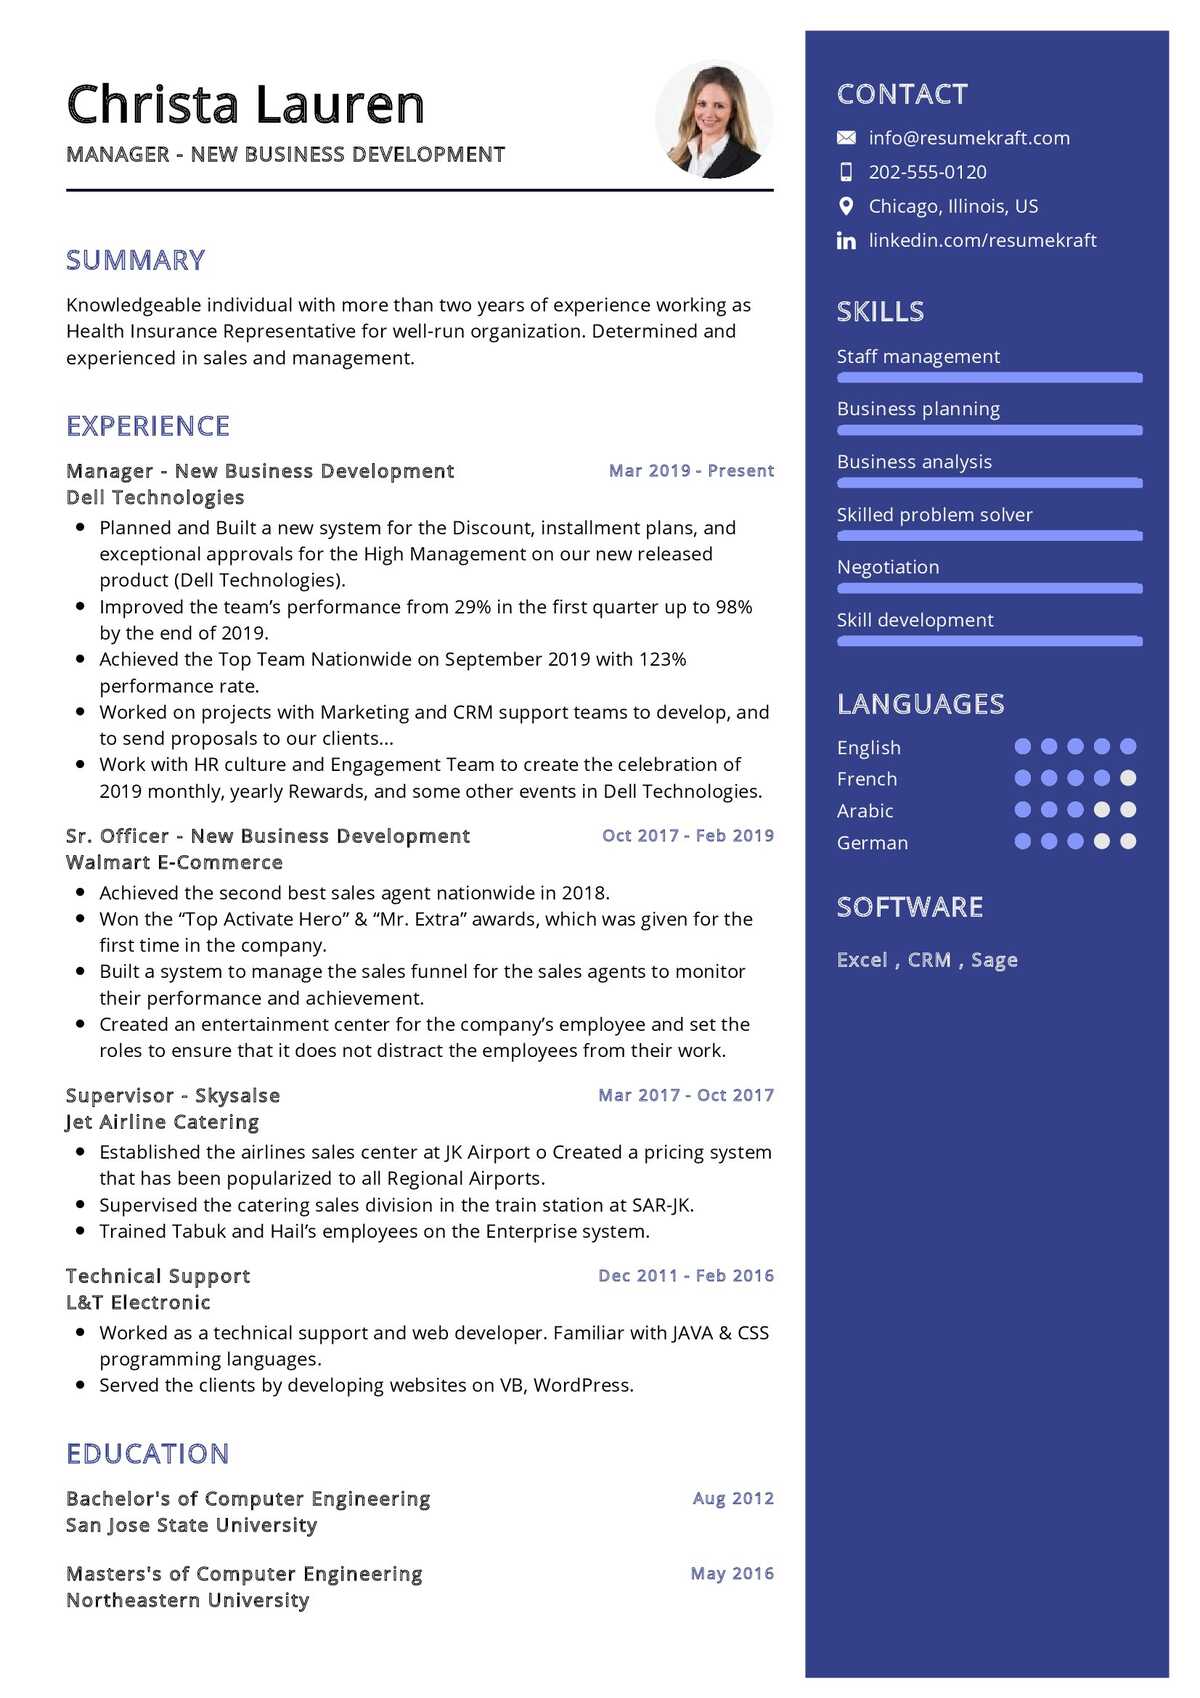 New Business Development Manager Resume 2021